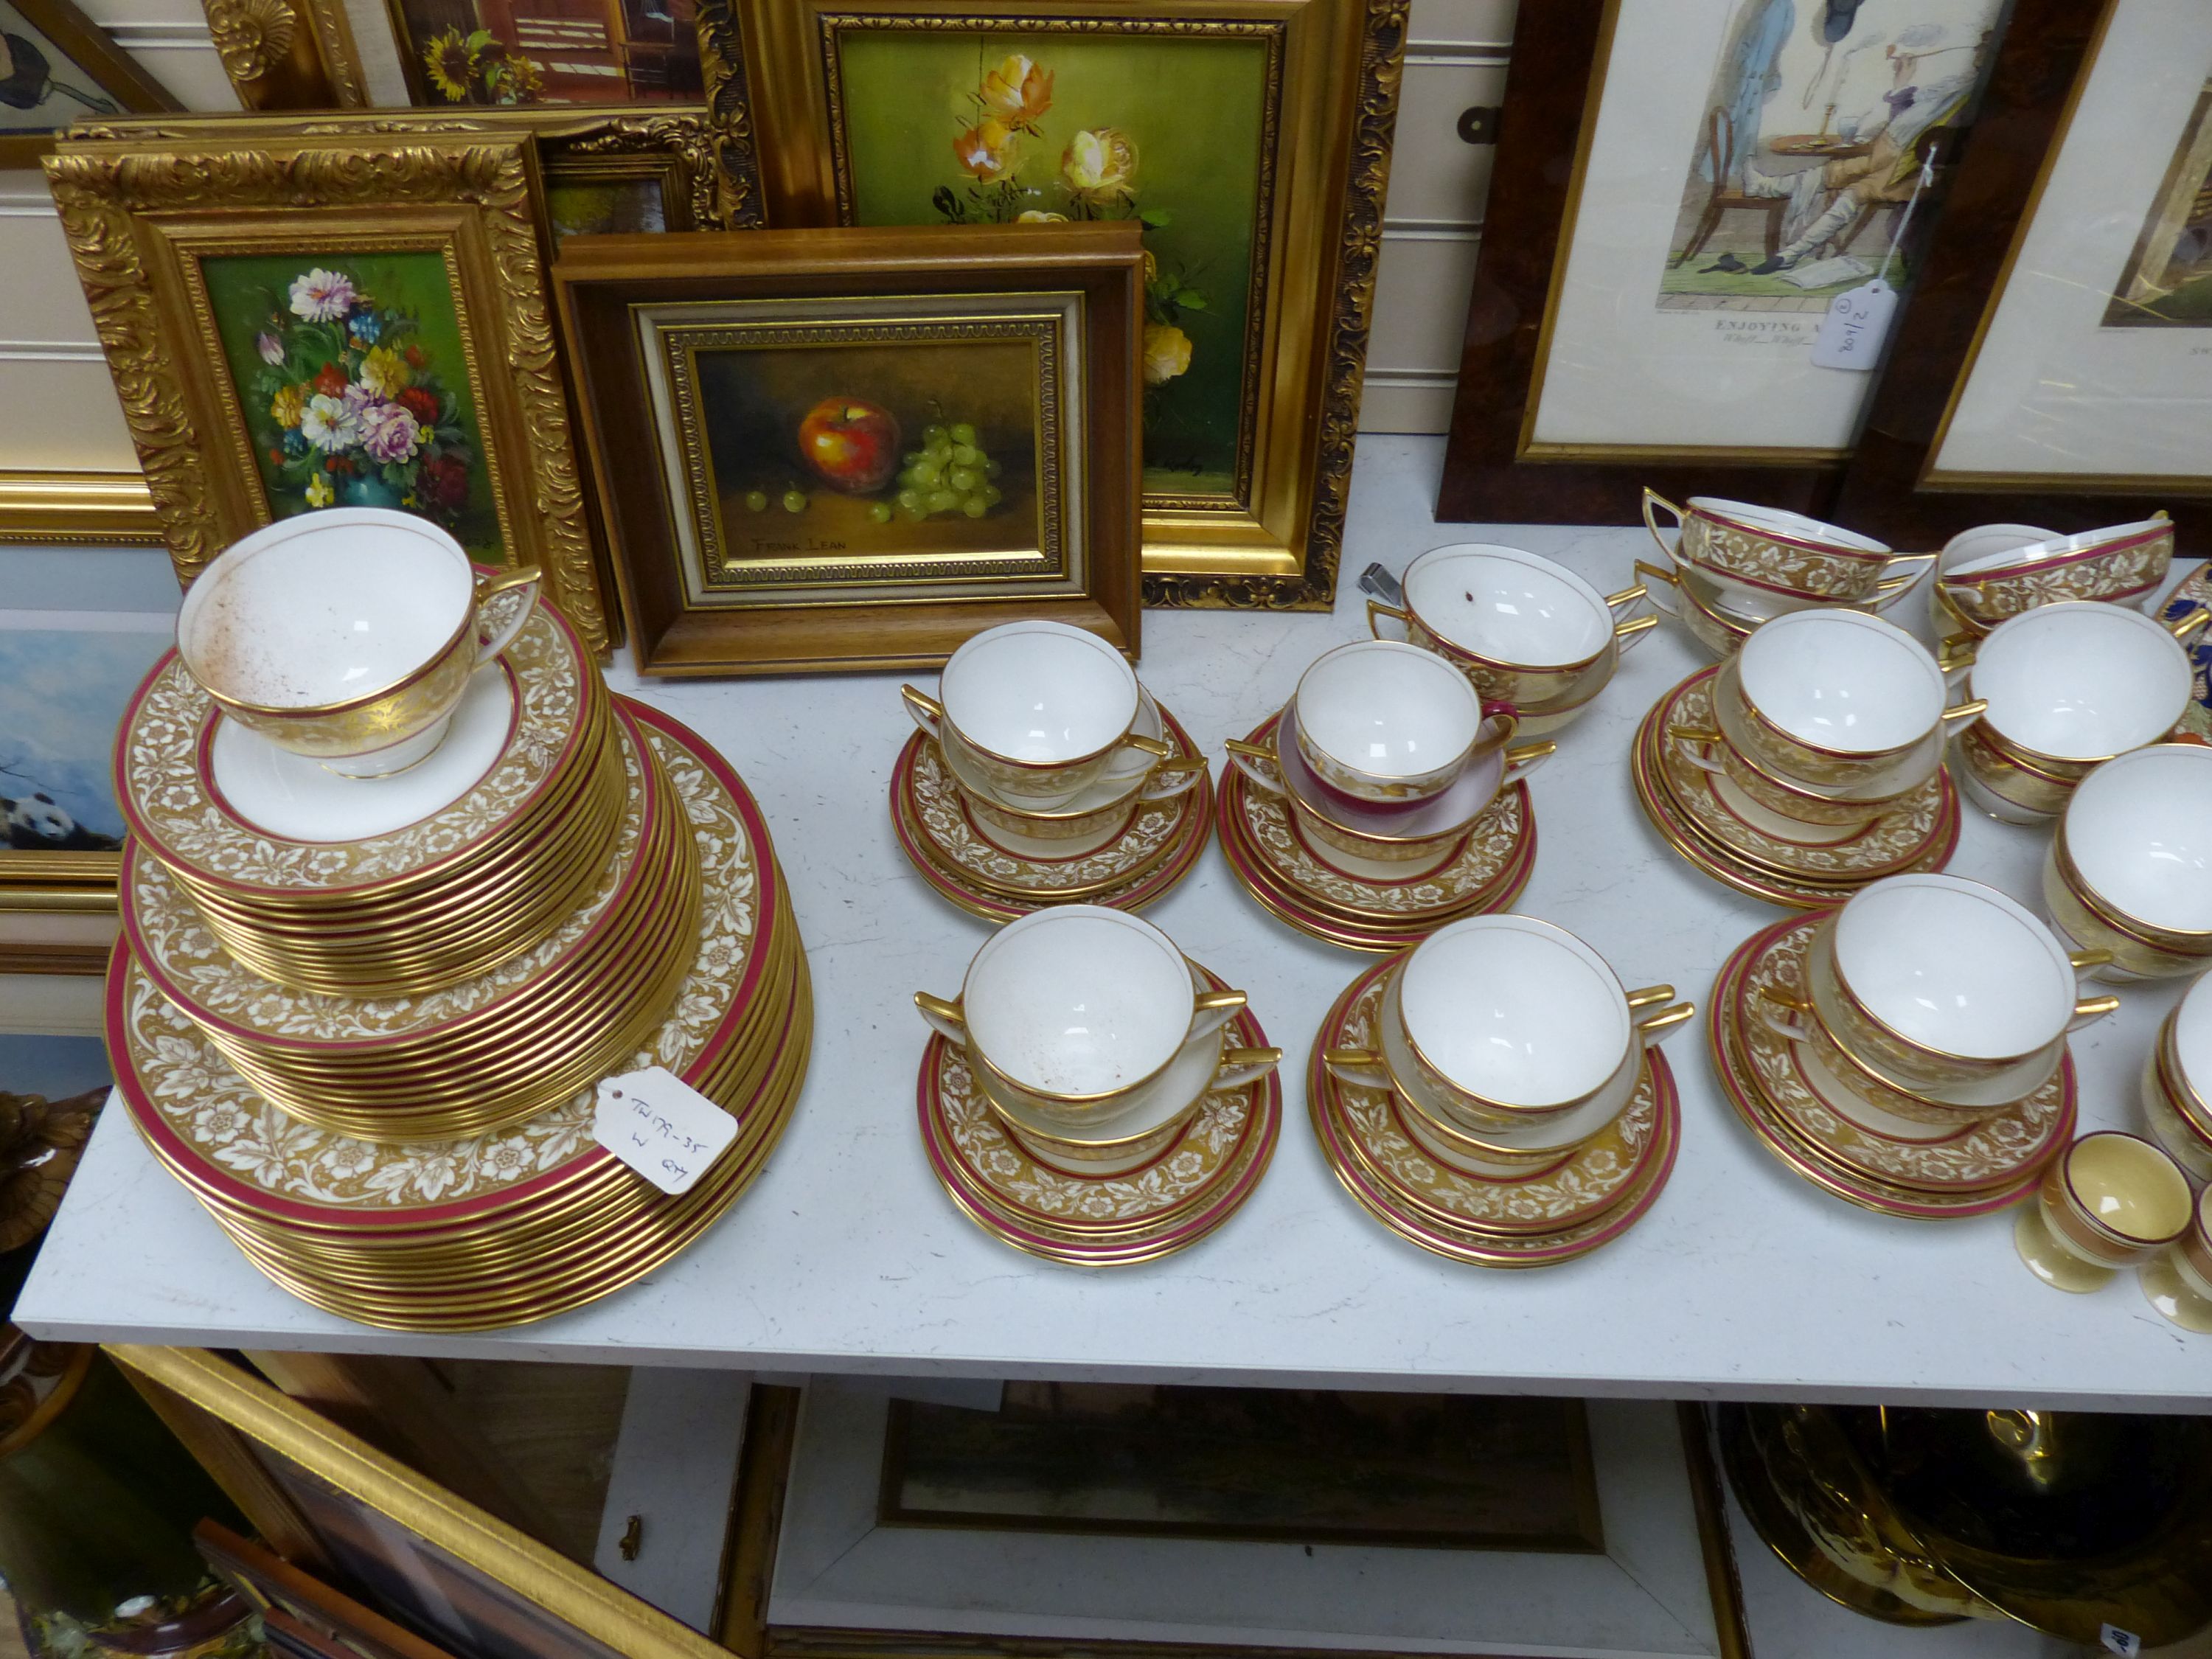 A Mintons breakfast set, a Minton part dinner service and a Woods floral-patterned part dinner service